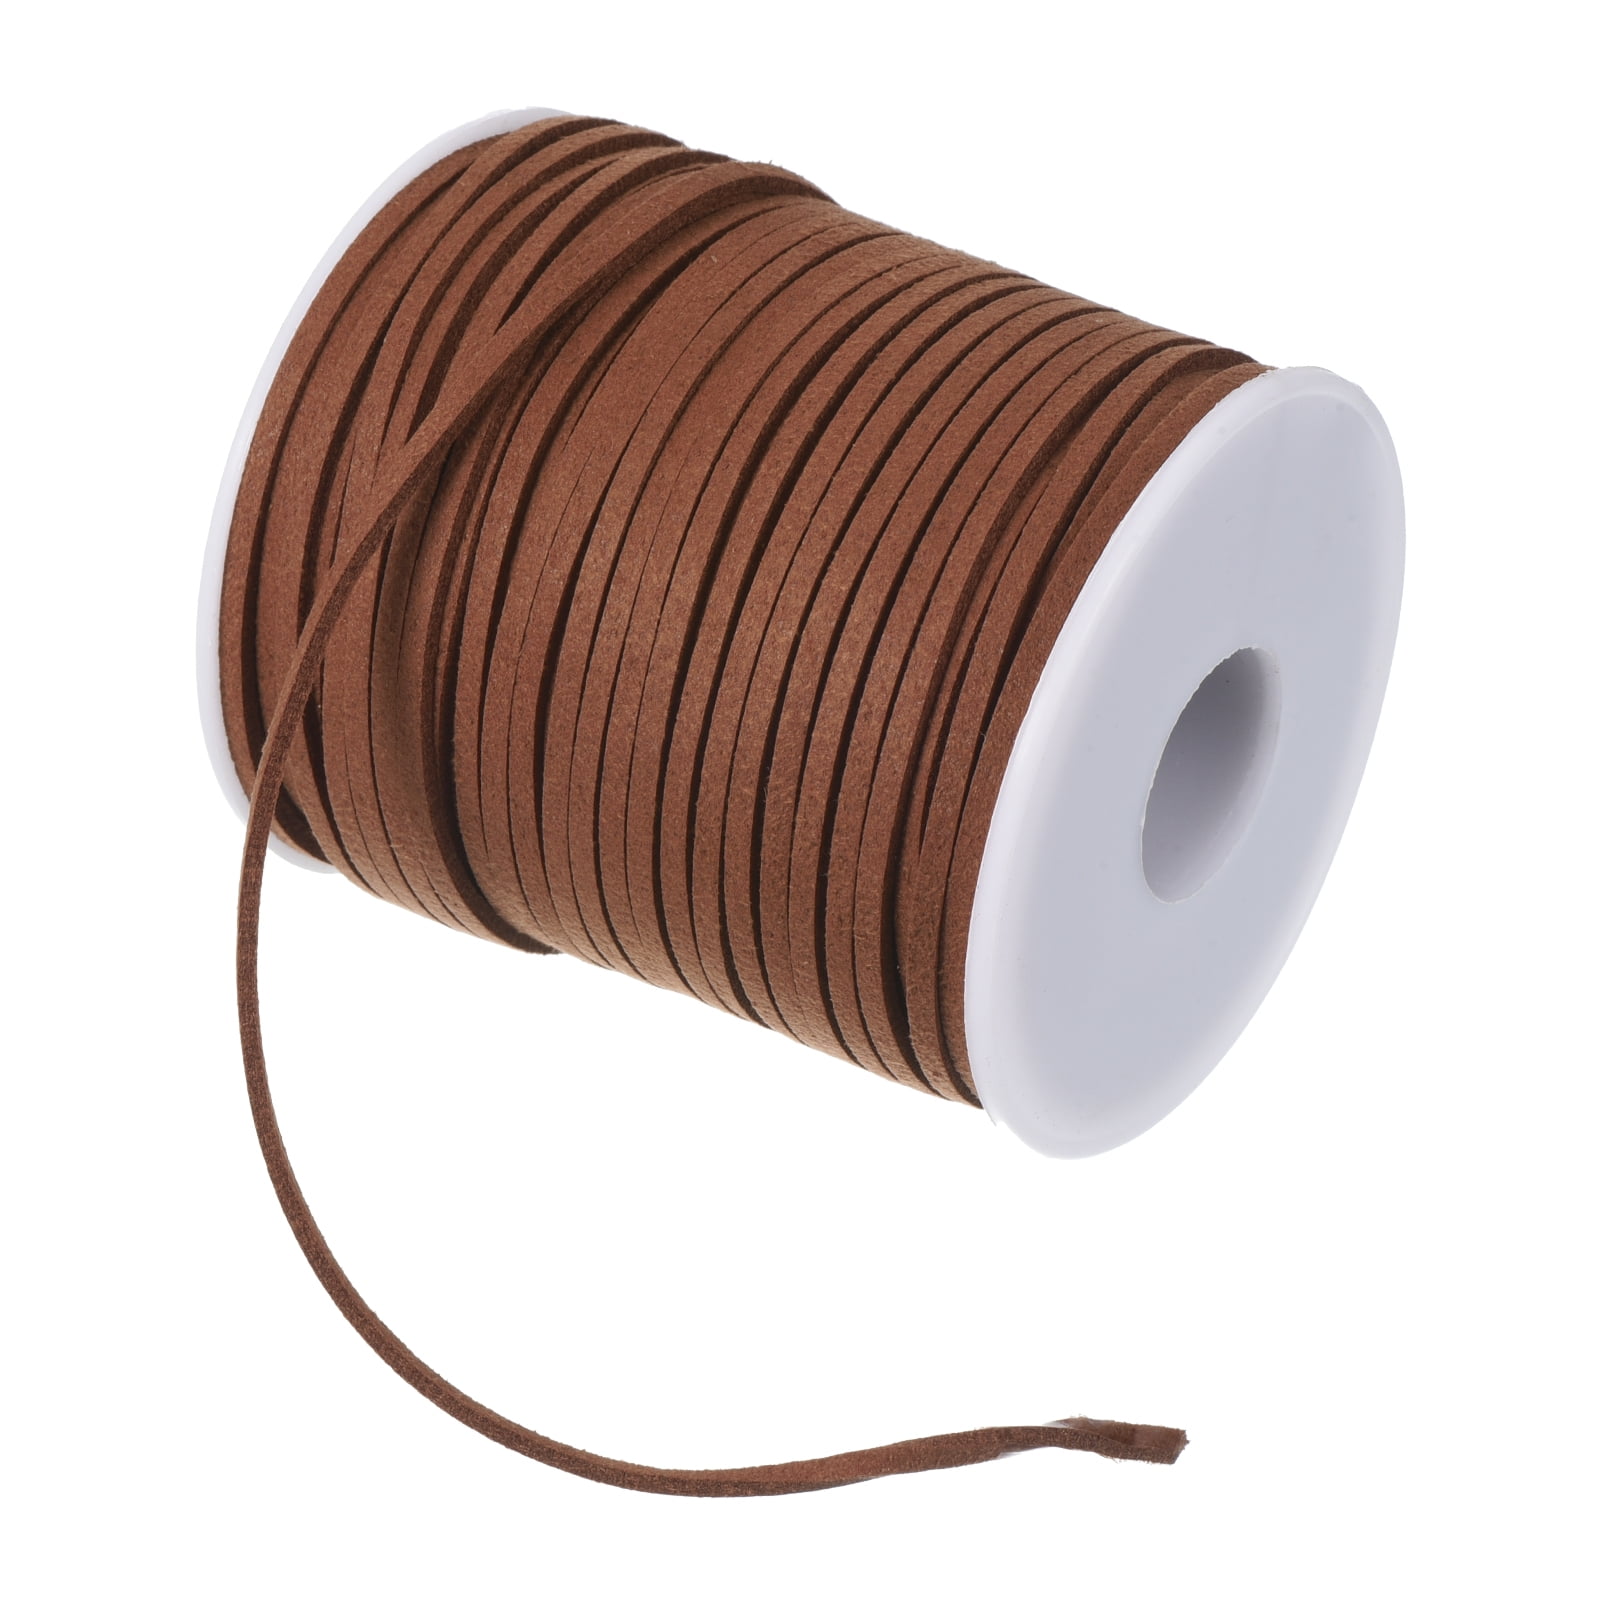 3mm Flat Faux Suede Cord: Faux Leather, 100% Vegan Cruelty Free, Sold by  Yard or Spool, Natural Color String Lace Tan Brown Black, Fast S&H 